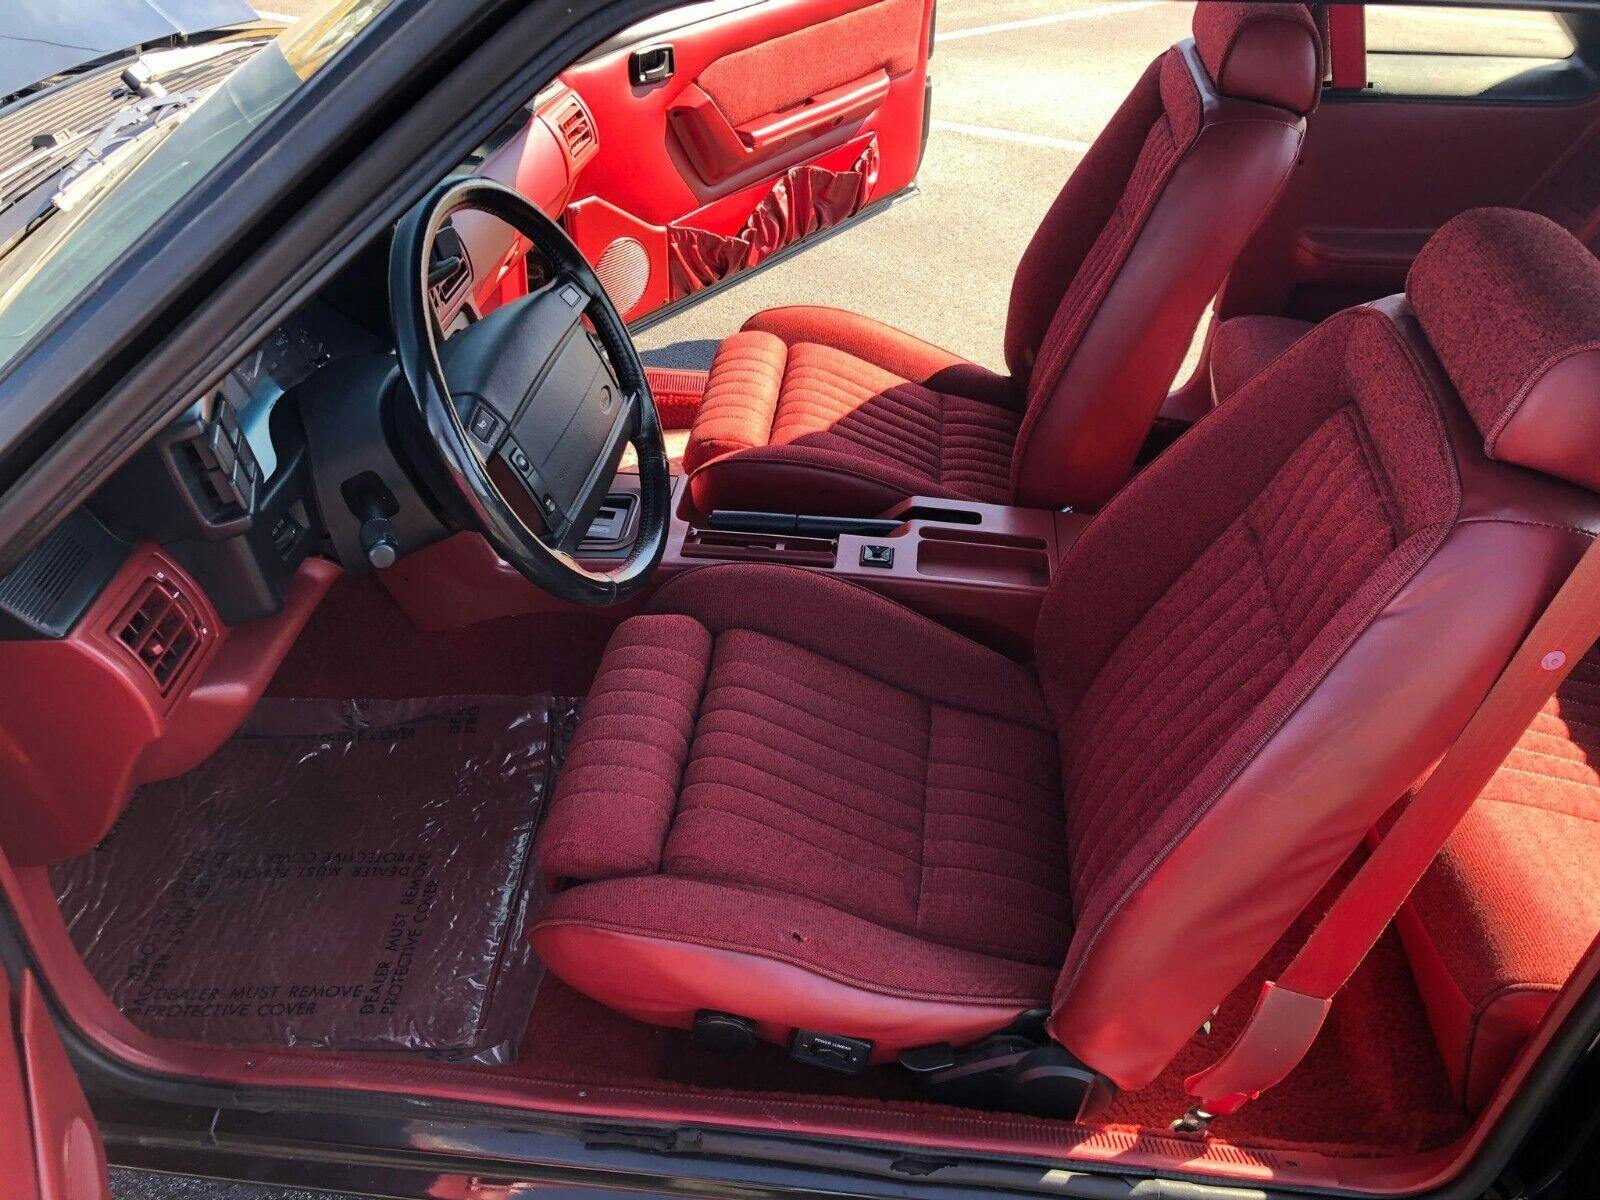 1990 Ford Mustang Holly research development vehicle interior front side